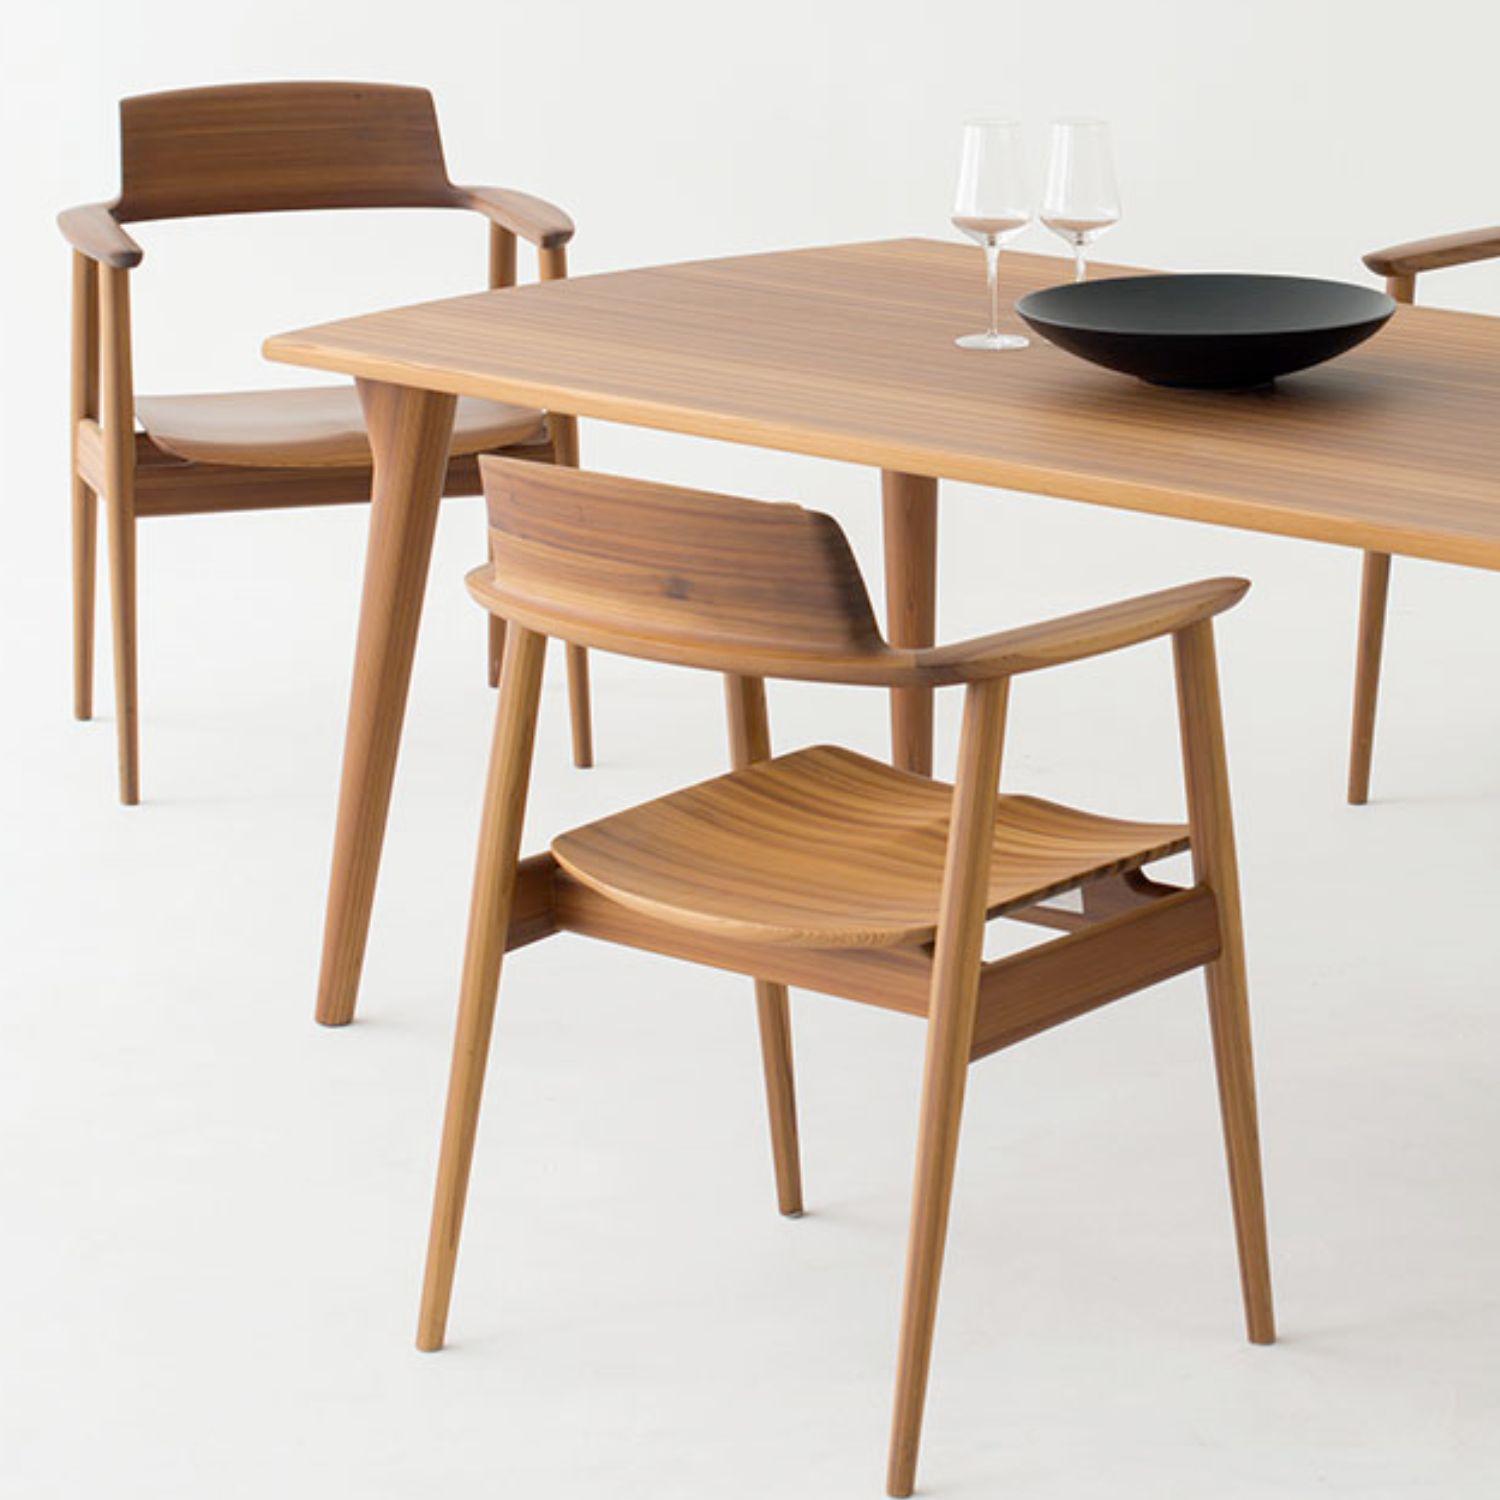 Motomi Kawakami 'Kisaragi' model KJ201 dining chair in Japanese Cedar for Hida.

For centuries, famed Hida artisans in Gifu prefecture have played a role in Japan's woodworking culture, crafting iconic bentwood furniture from sustainable local